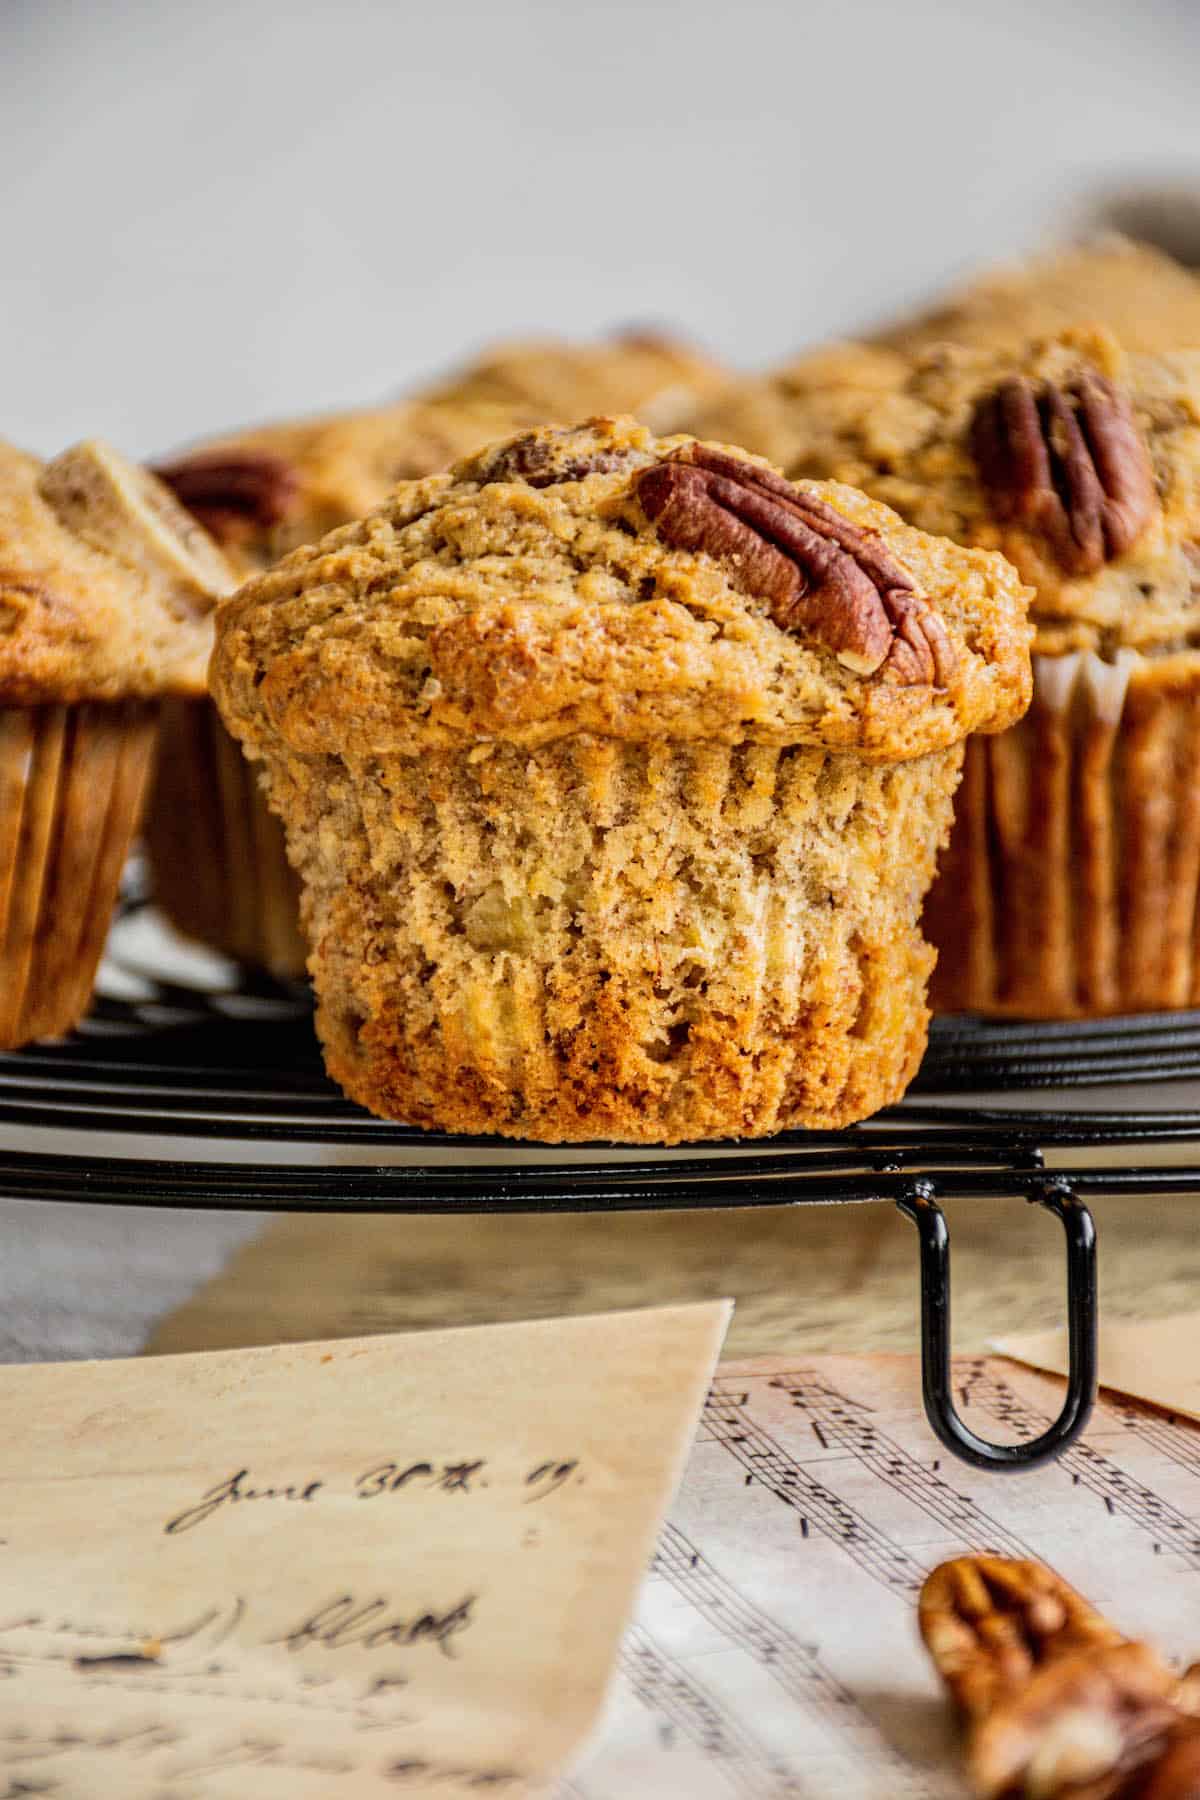 baked banana muffin with pecan.